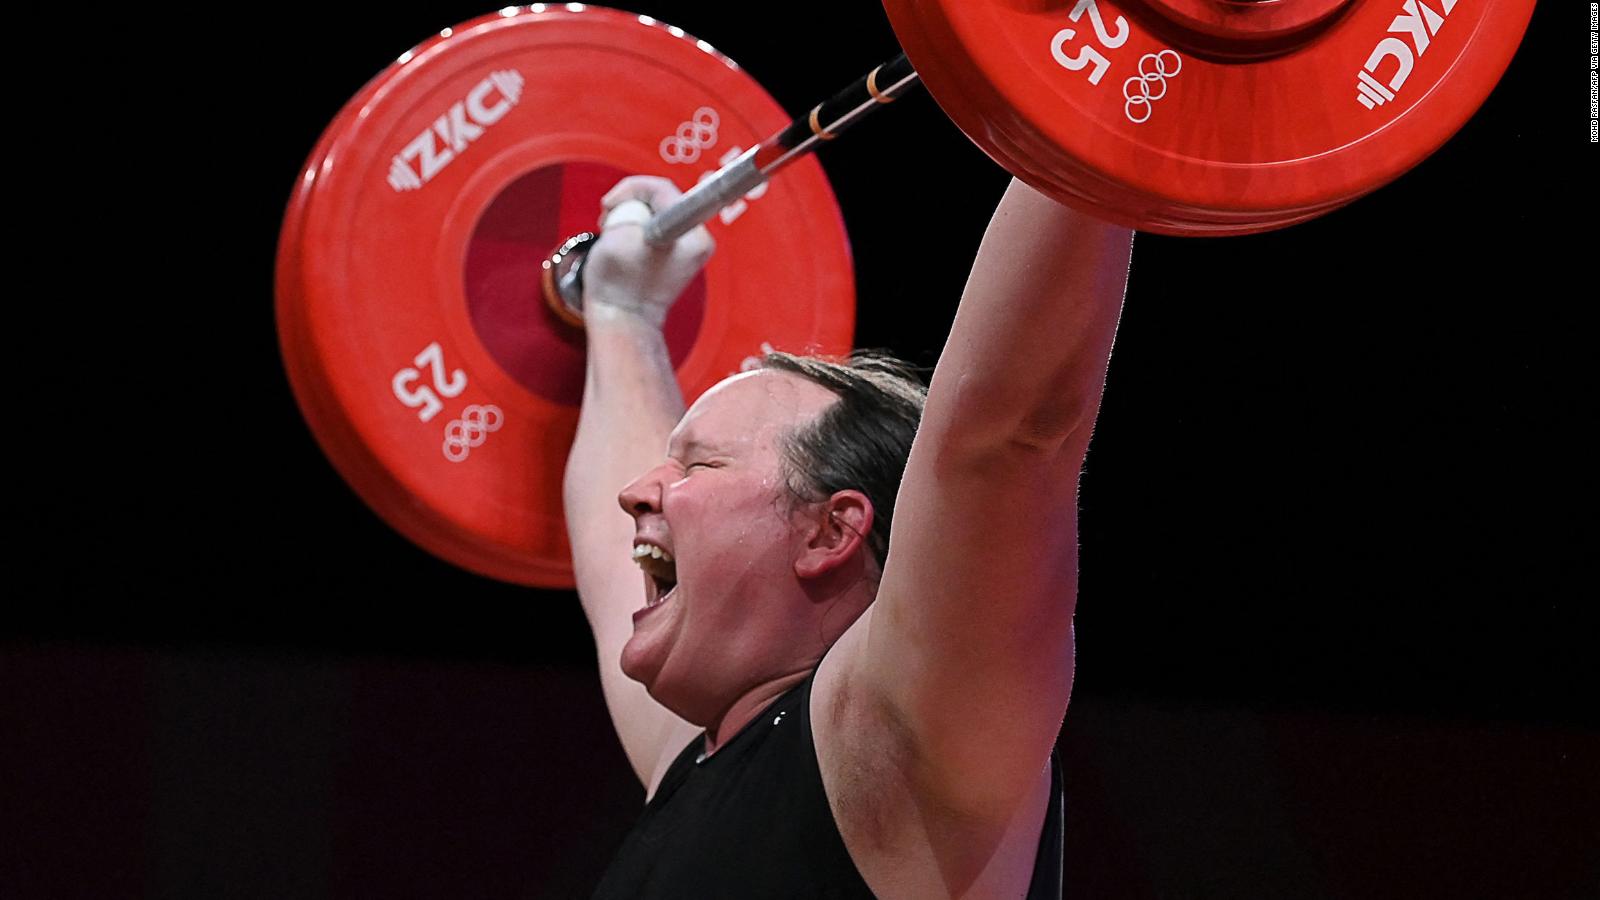 Laurel Hubbard first out transgender woman to compete at the